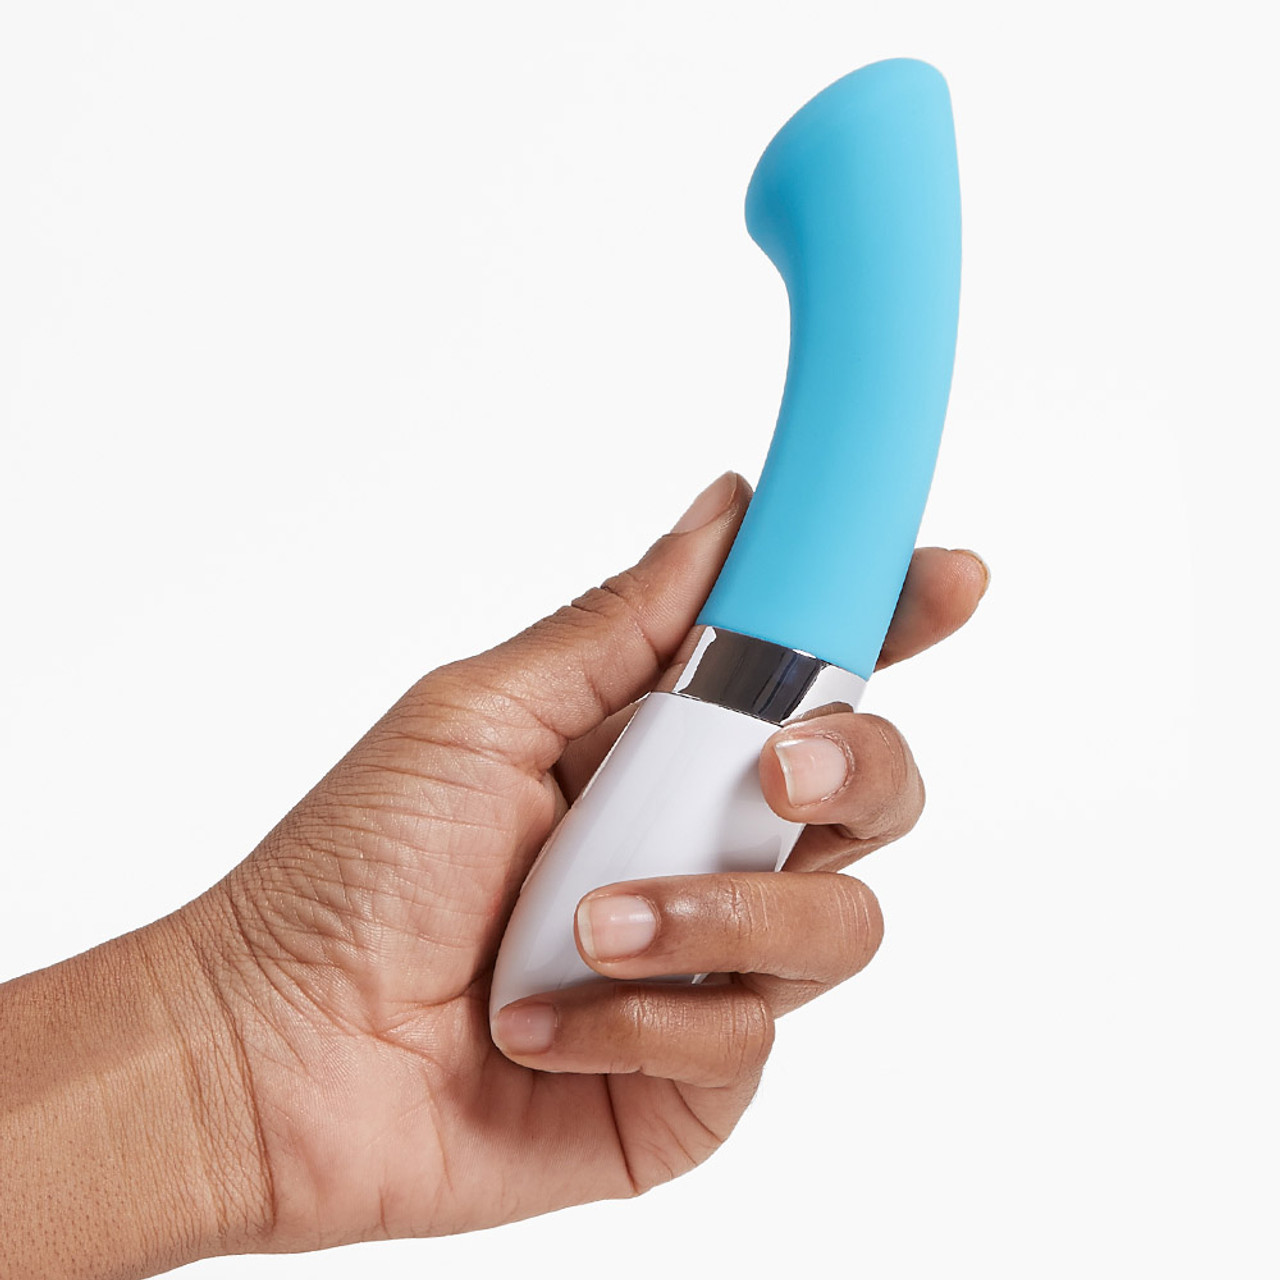 The 'Lelo Gigi 2' turquoise toy held in hand